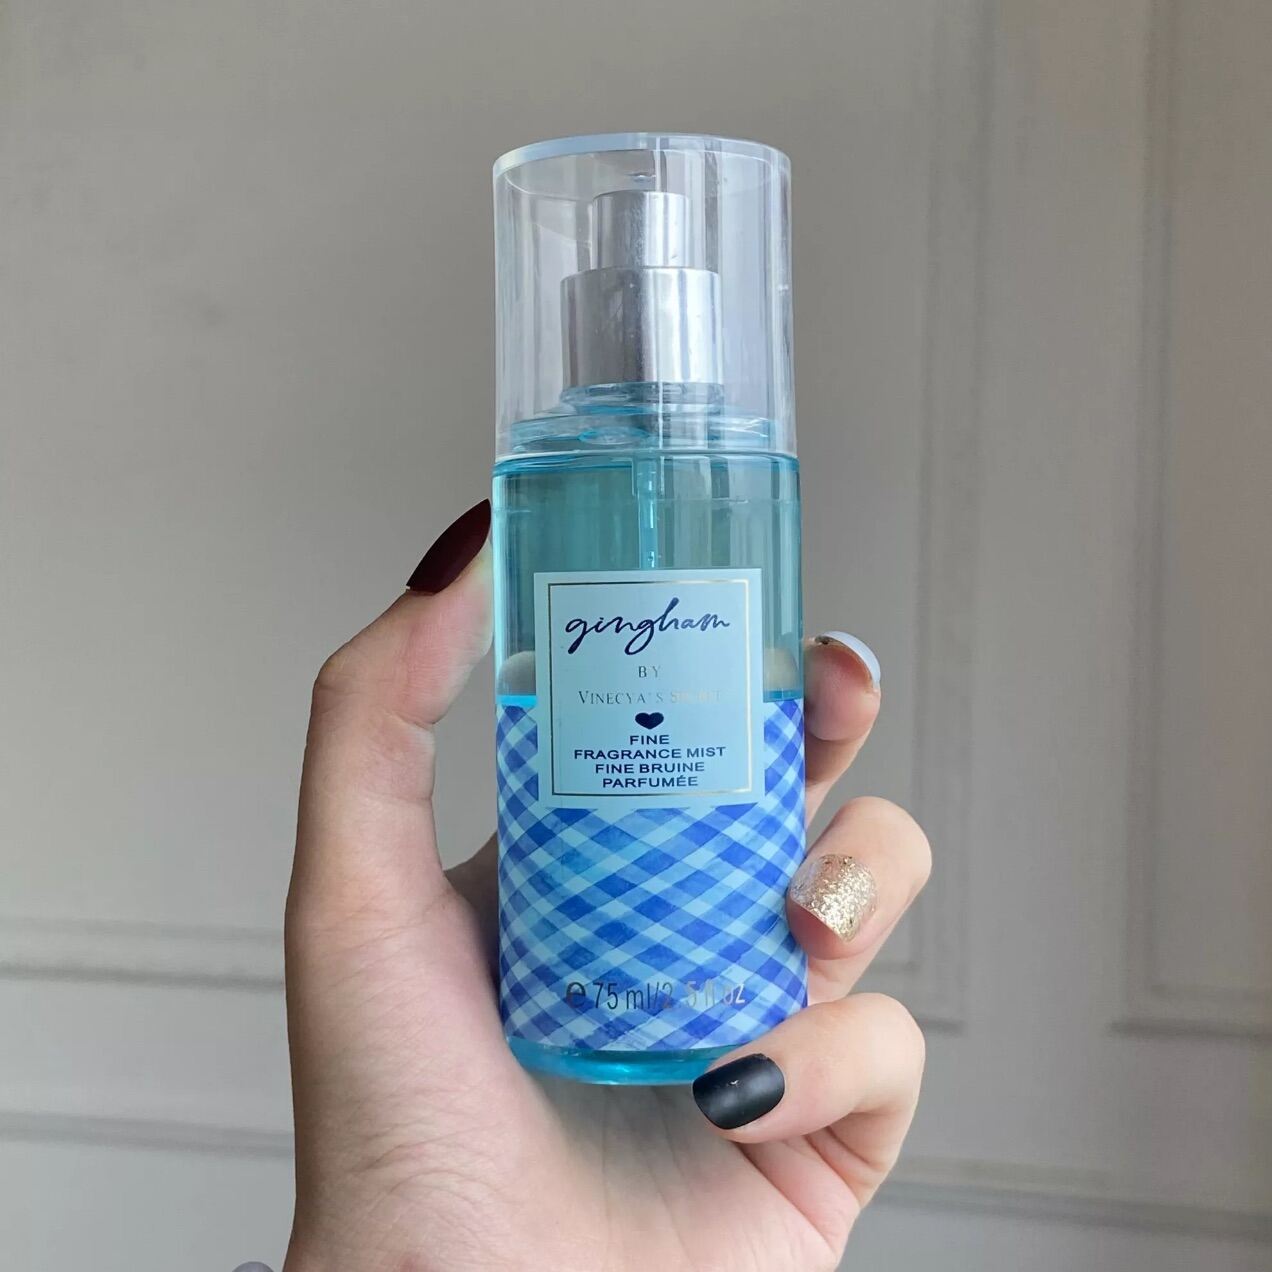 XỊT THƠM BODY VICTORIA'S SECRET INTO THE NIGHT - GINGHAM - YOU'RE THE ONE 75ML - Body mist 75ml